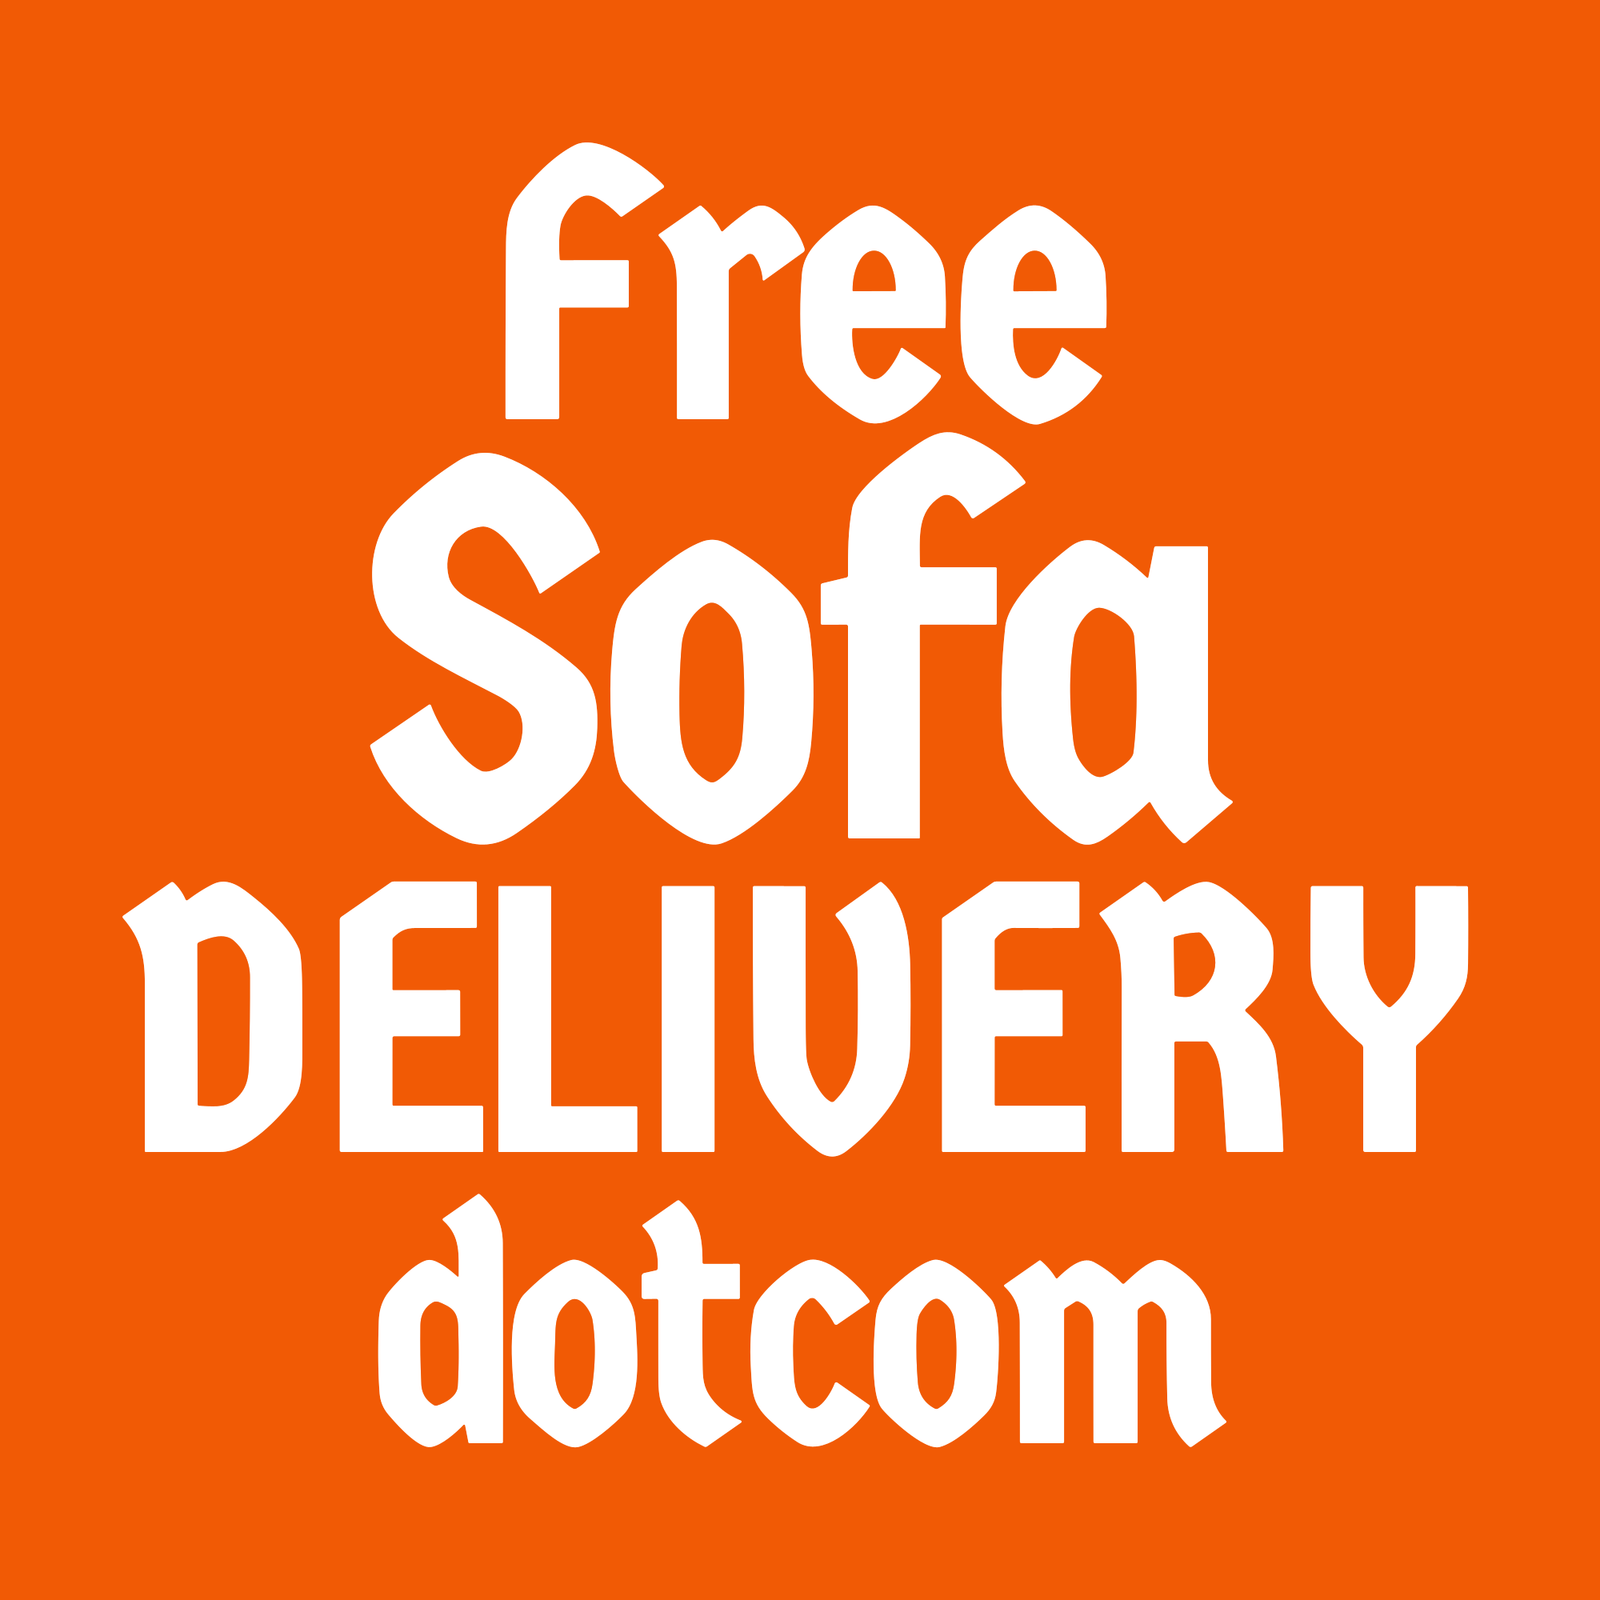 Free sofa delivery - Free furniture delivery